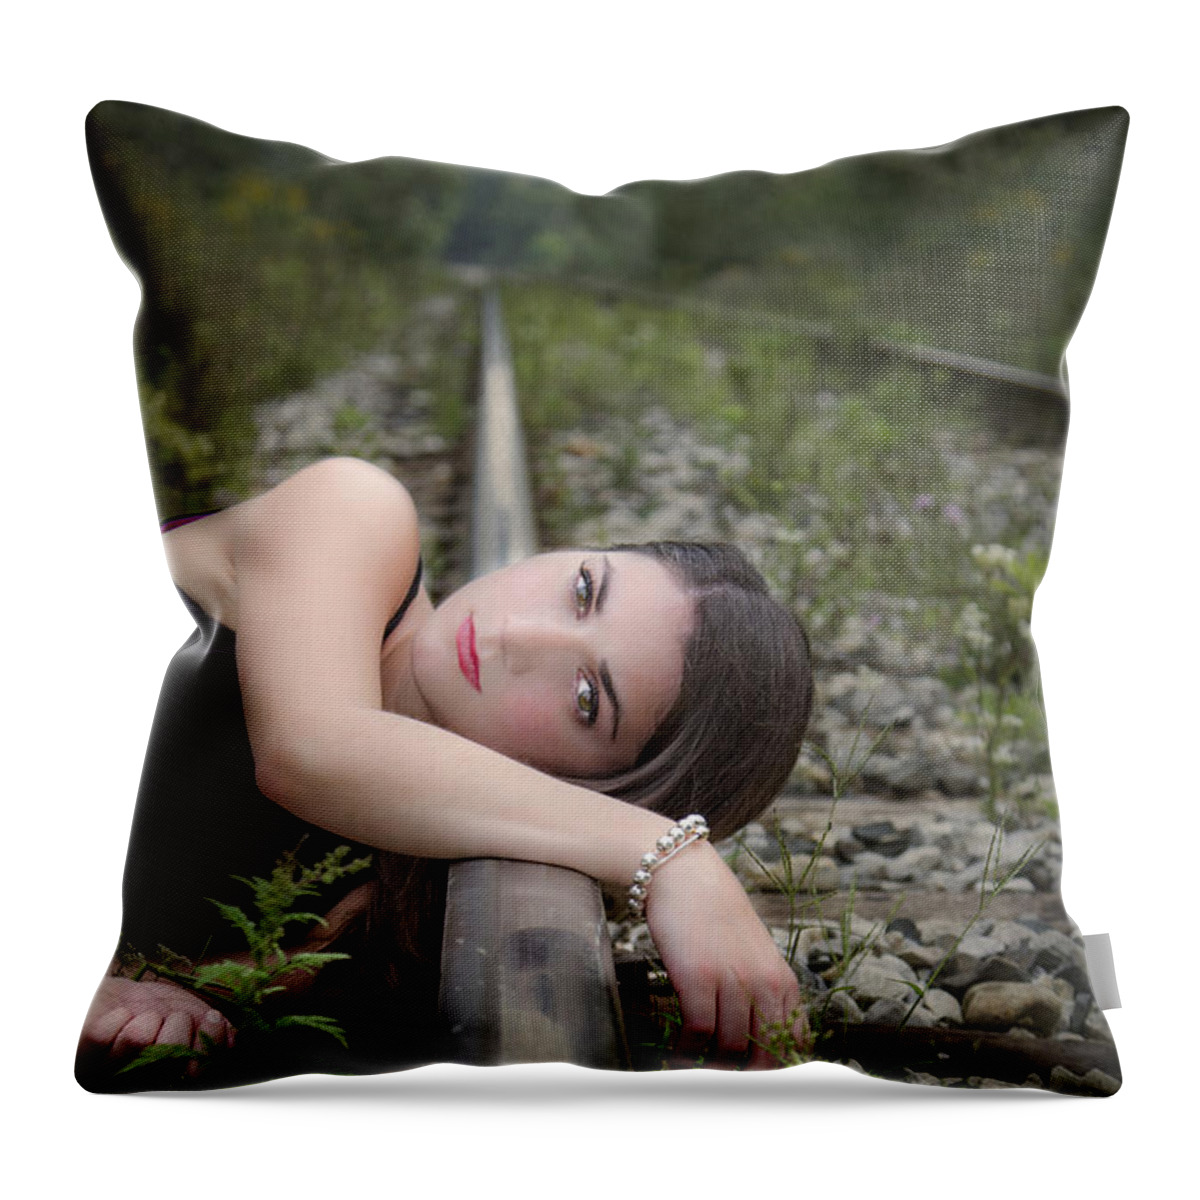 Alone Throw Pillow featuring the photograph Confessions Of A Broken Heart by Evelina Kremsdorf